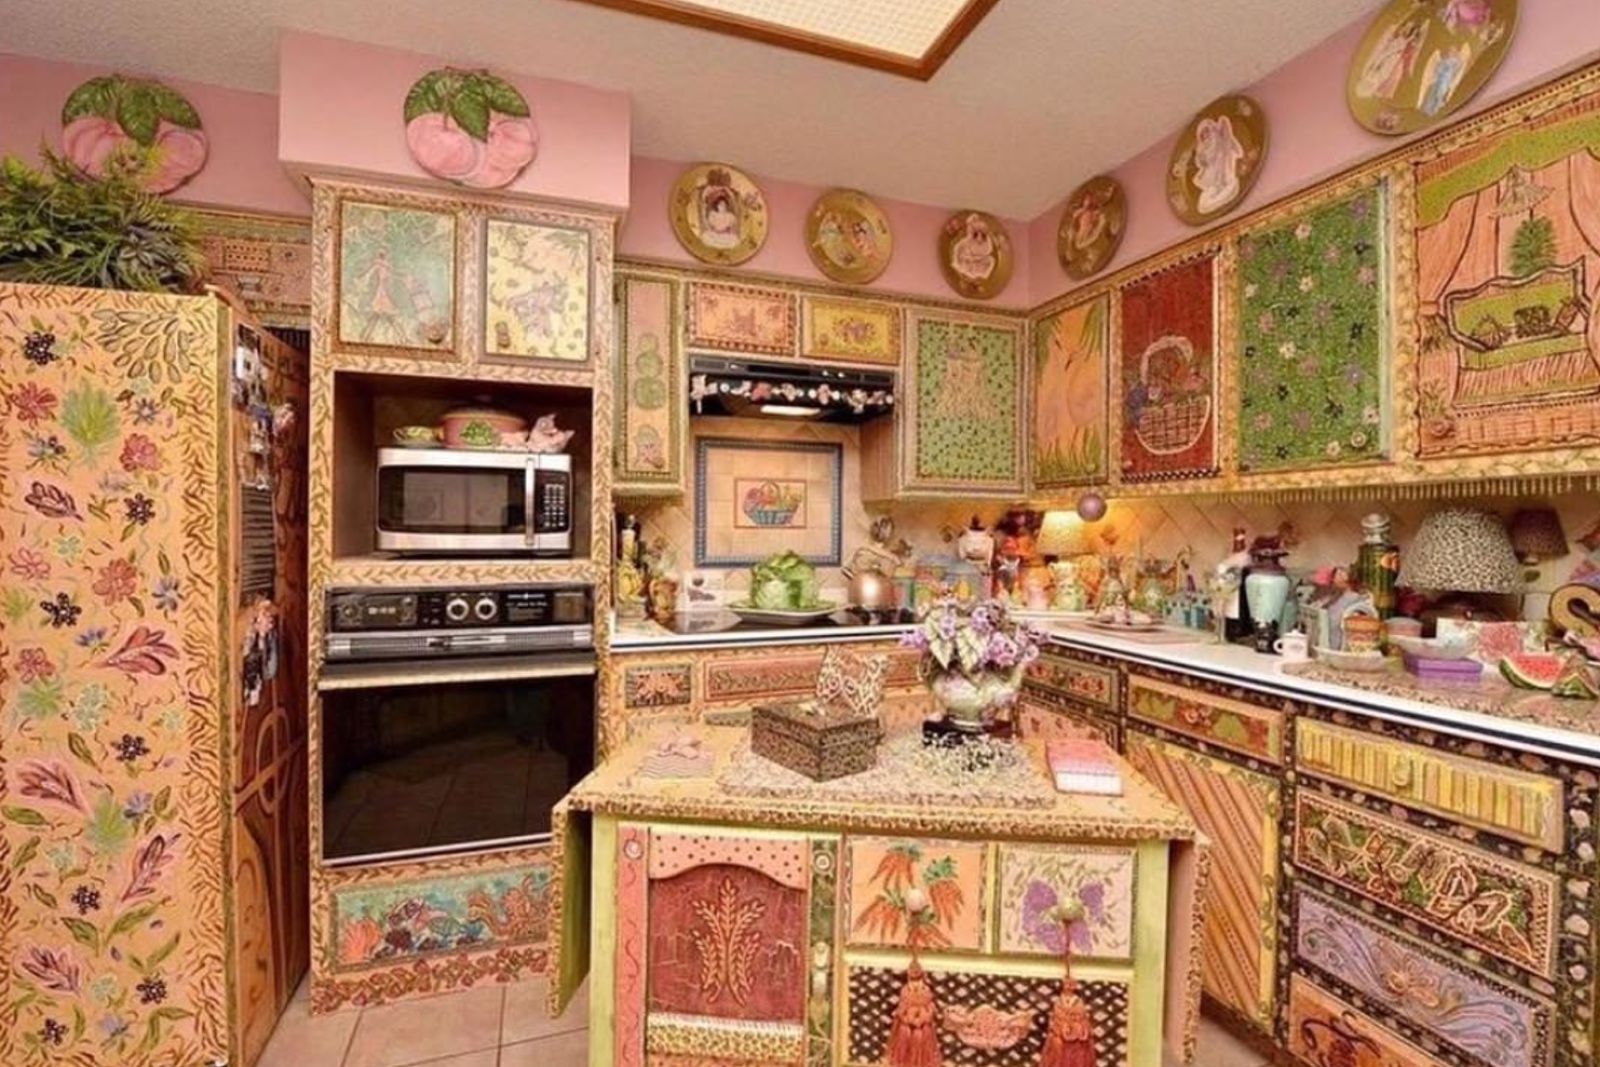 These Interior Decor Disasters Will Leave You Cringing image 1